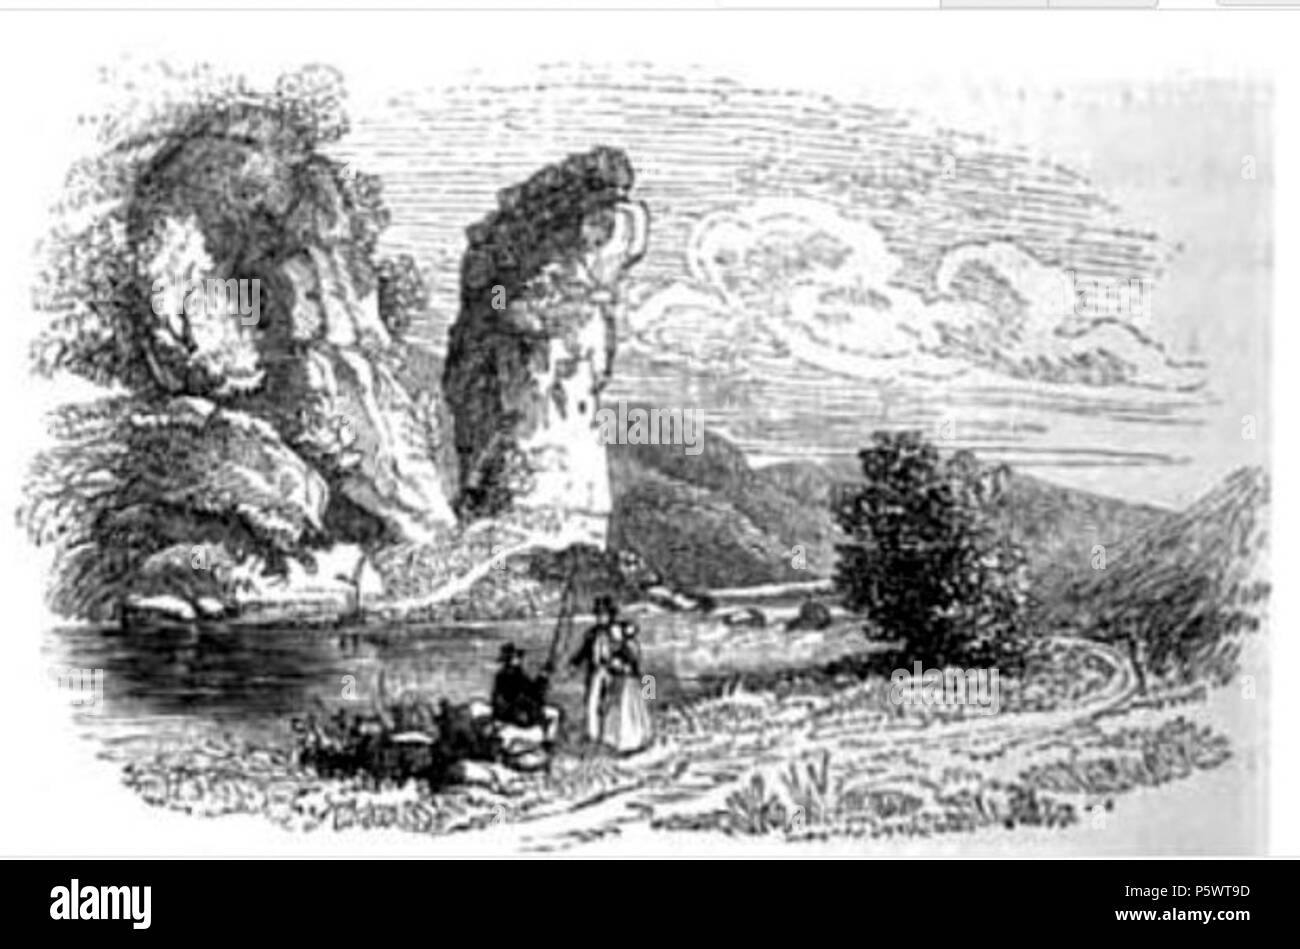 N/A. Rock at the end of Dovedale from Thomas Christopher Hofland's fishing book p.310 . 1839.   Thomas Christopher Hofland  (1777–1843)     Alternative names Thomas Christopher Hoffland; Thomas Hofland; T.C. Hofland; Hofland; Hoffland; [Mr. Hofland]; Ofland  Description British painter  Date of birth/death 25 December 1777 3 January 1843  Location of birth/death Worksop Leamington Spa  Authority control  : Q2528234 VIAF:35910861 ISNI:0000 0000 6705 7336 ULAN:500026697 LCCN:n85321758 NLA:35609523 WorldCat 468 Dovedale by Hofland Stock Photo